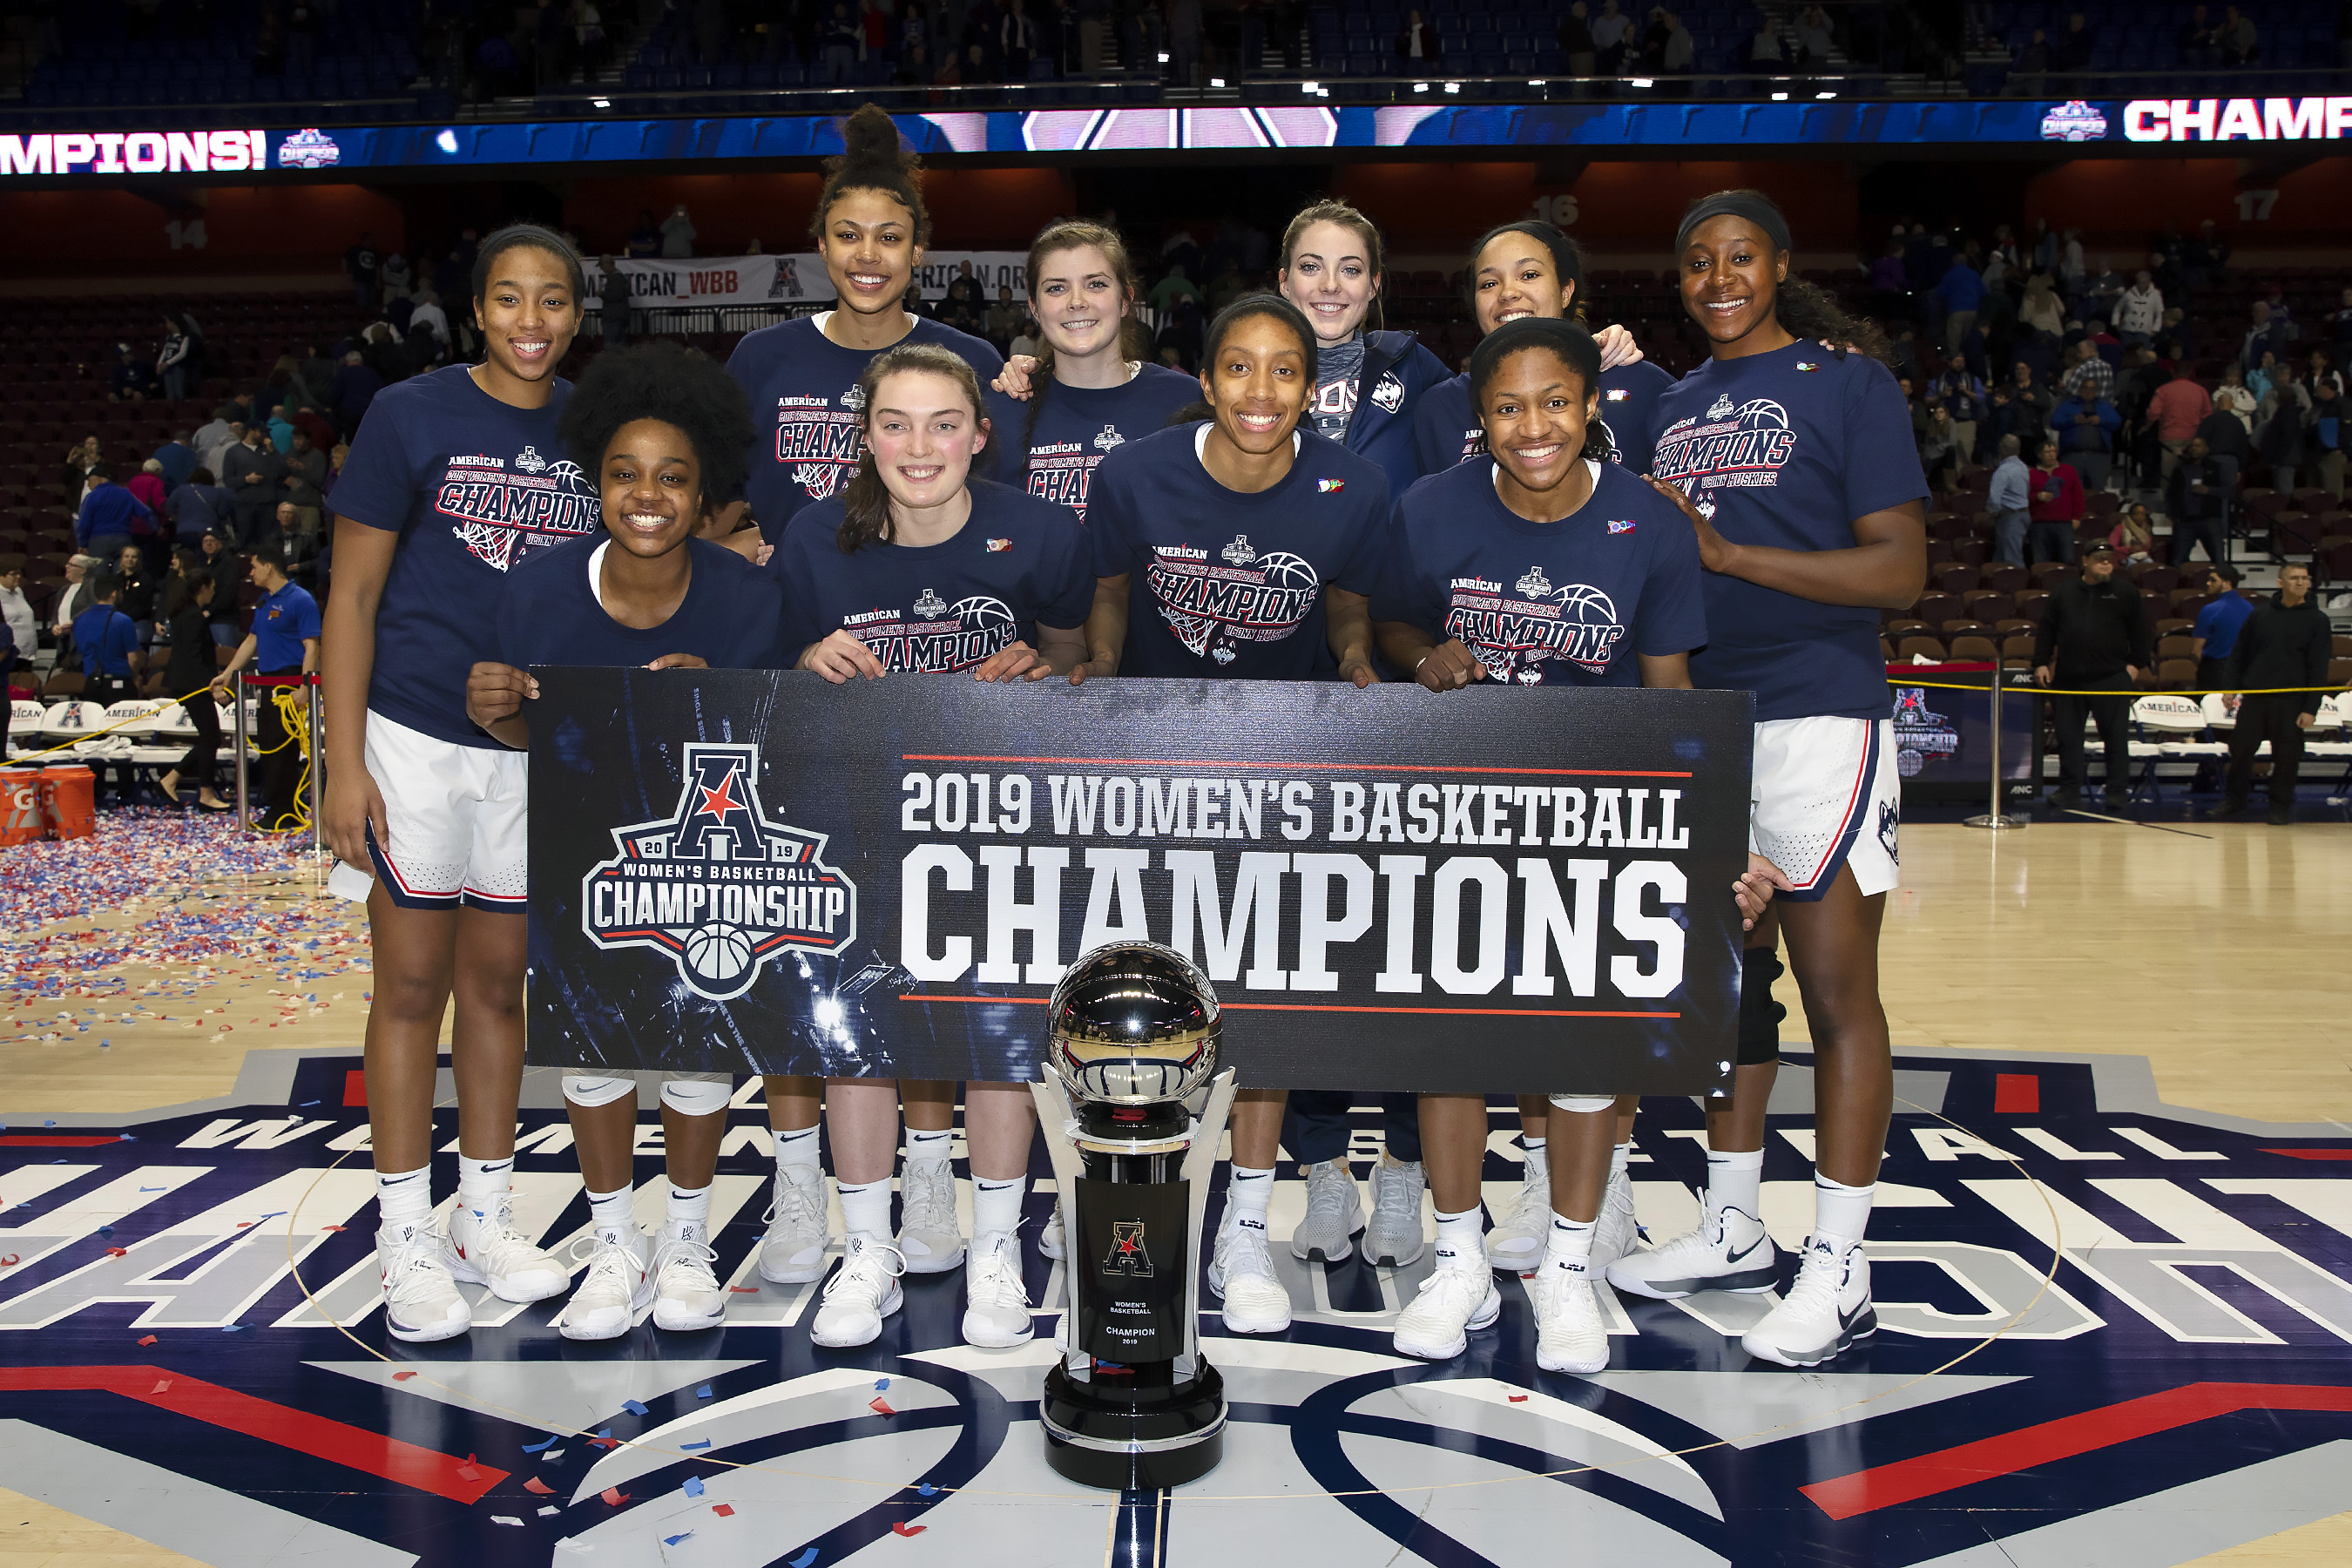 The Huskies defeated UCF 66-45 for their sixth consecutive conference championship. (Stephen Slade '89 (SFA) for UConn)